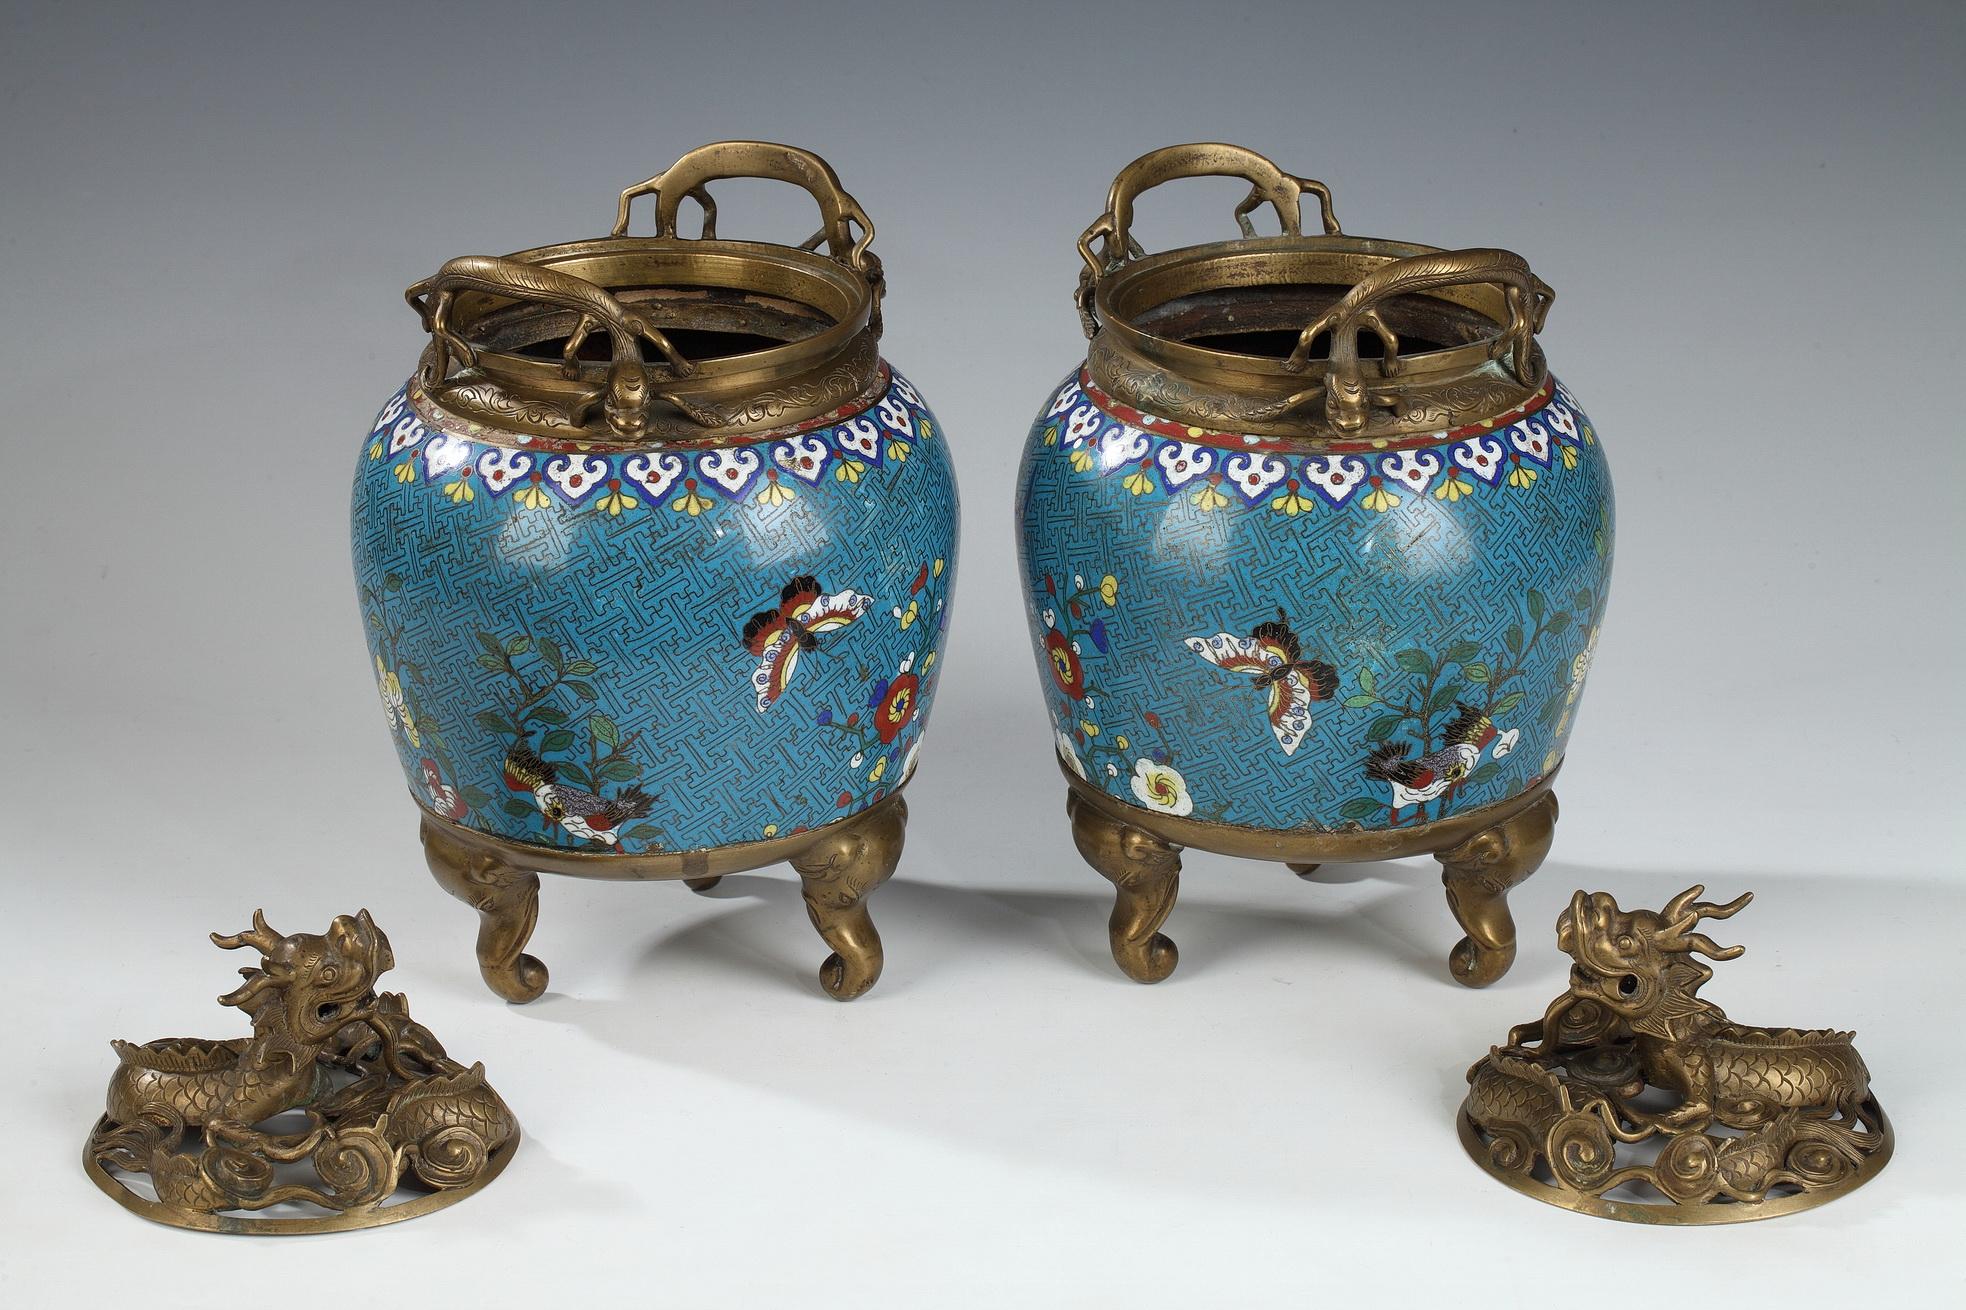 Pair of Chinese polychrome cloisonné enamel jars in a gilt bronze mounting. The body is covered with geometric baffles and flowers and butterflies ornaments, relying on a tripod base with elephants’ heads. The whole is surmounted by a ying-long